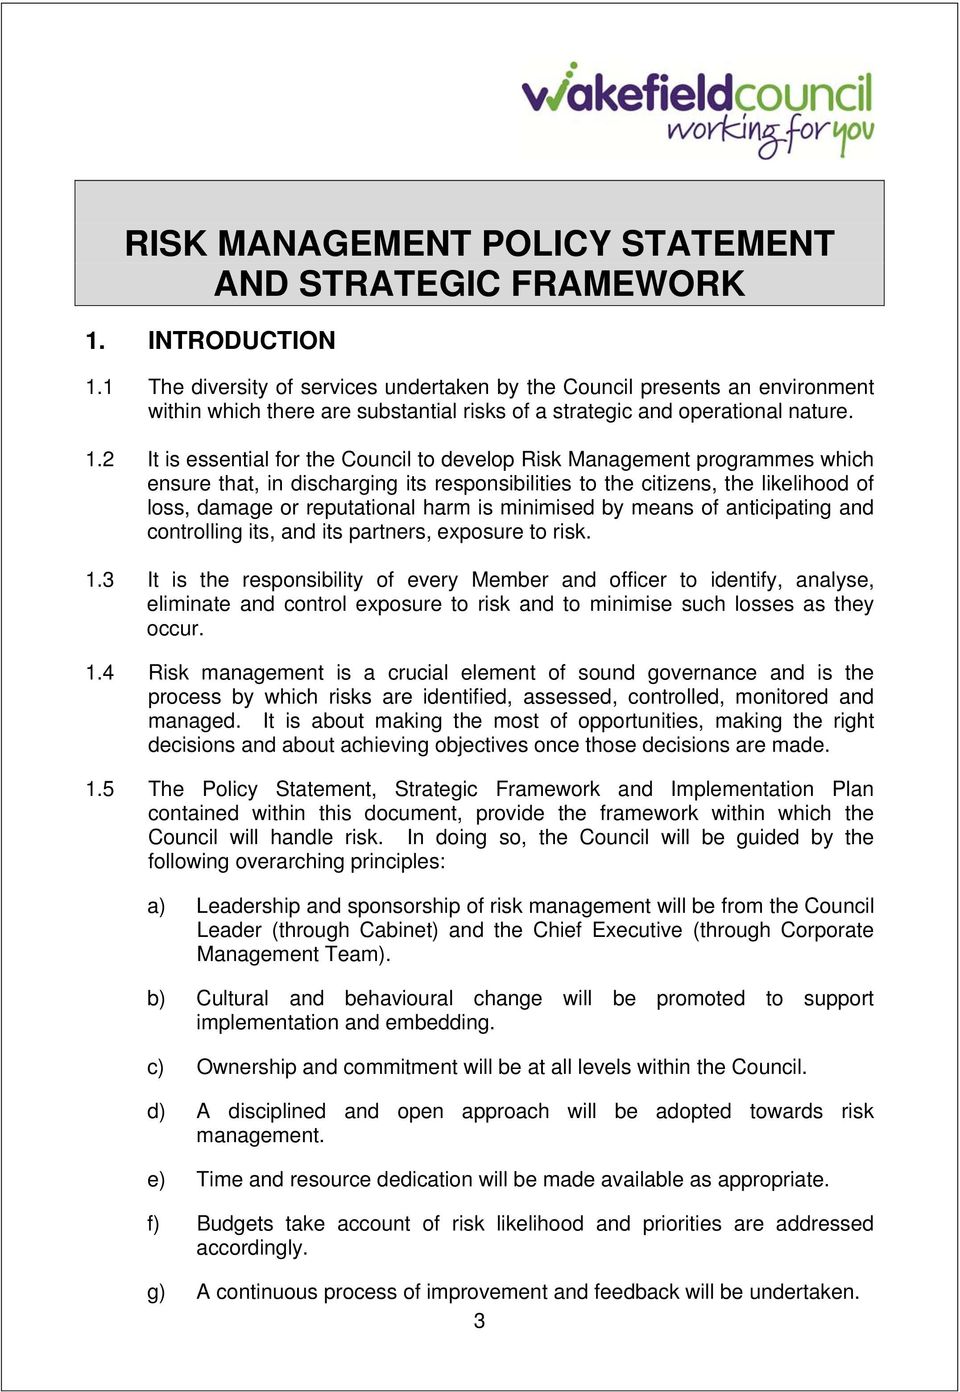 2 It is essential for the Council to develop Risk Management programmes which ensure that, in discharging its responsibilities to the citizens, the likelihood of loss, damage or reputational harm is